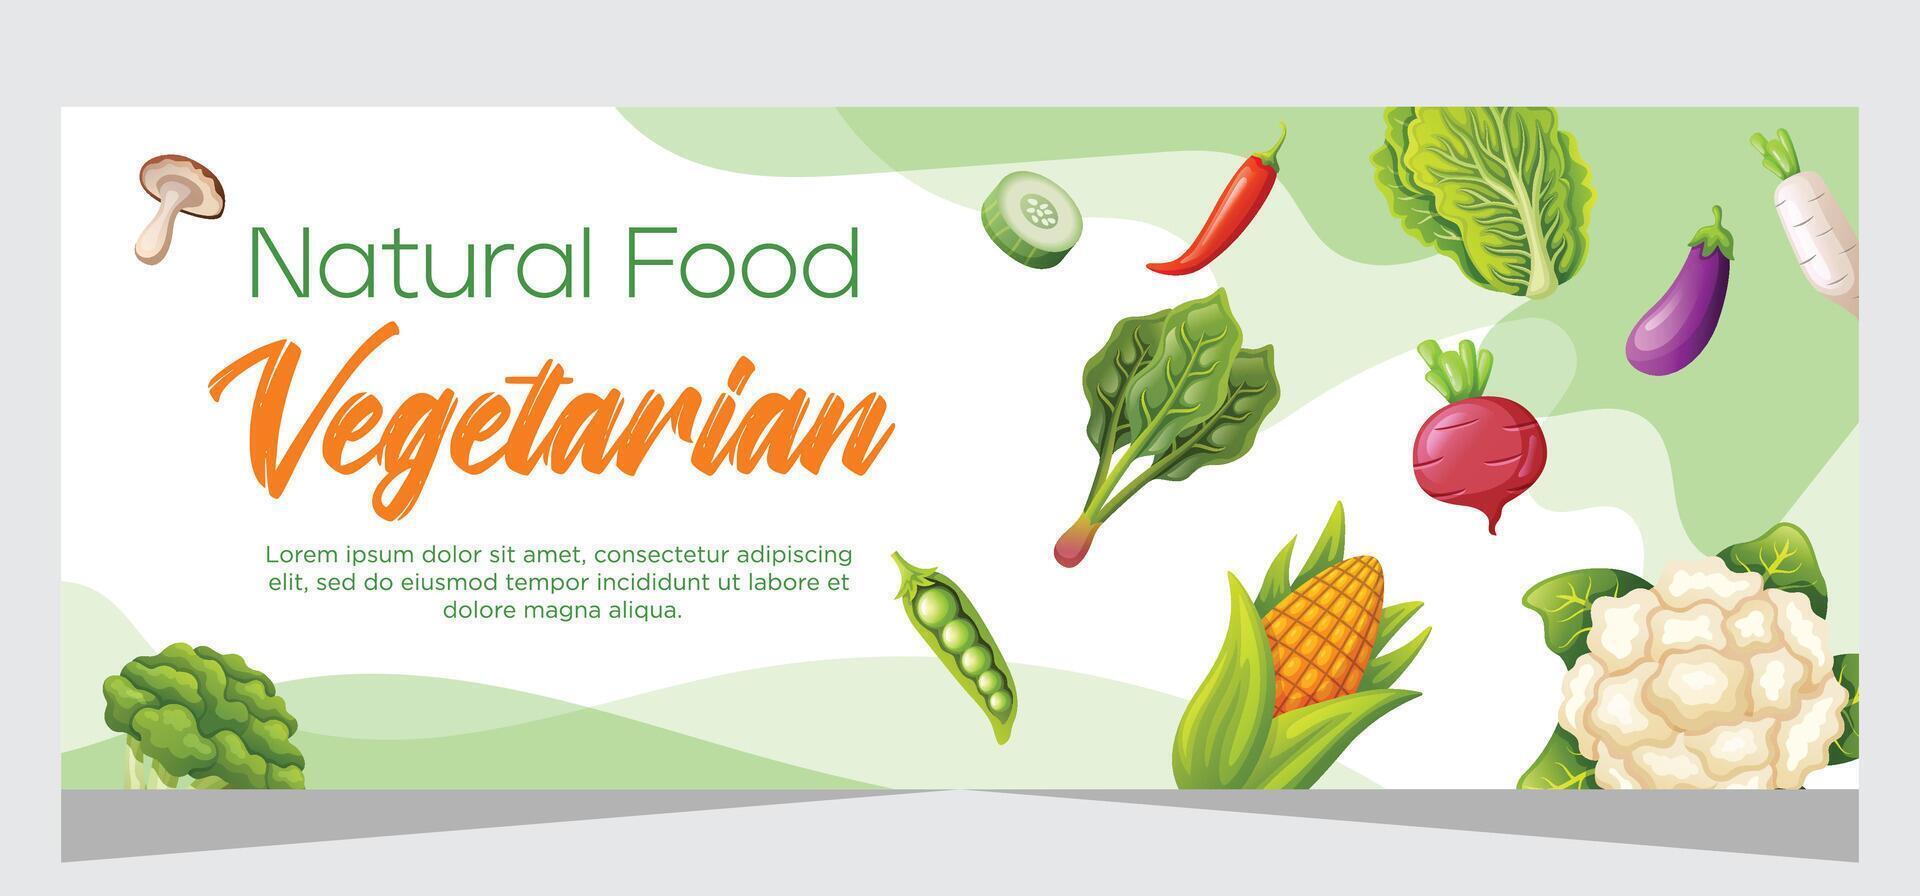 Organic and healthy food banner template design vector